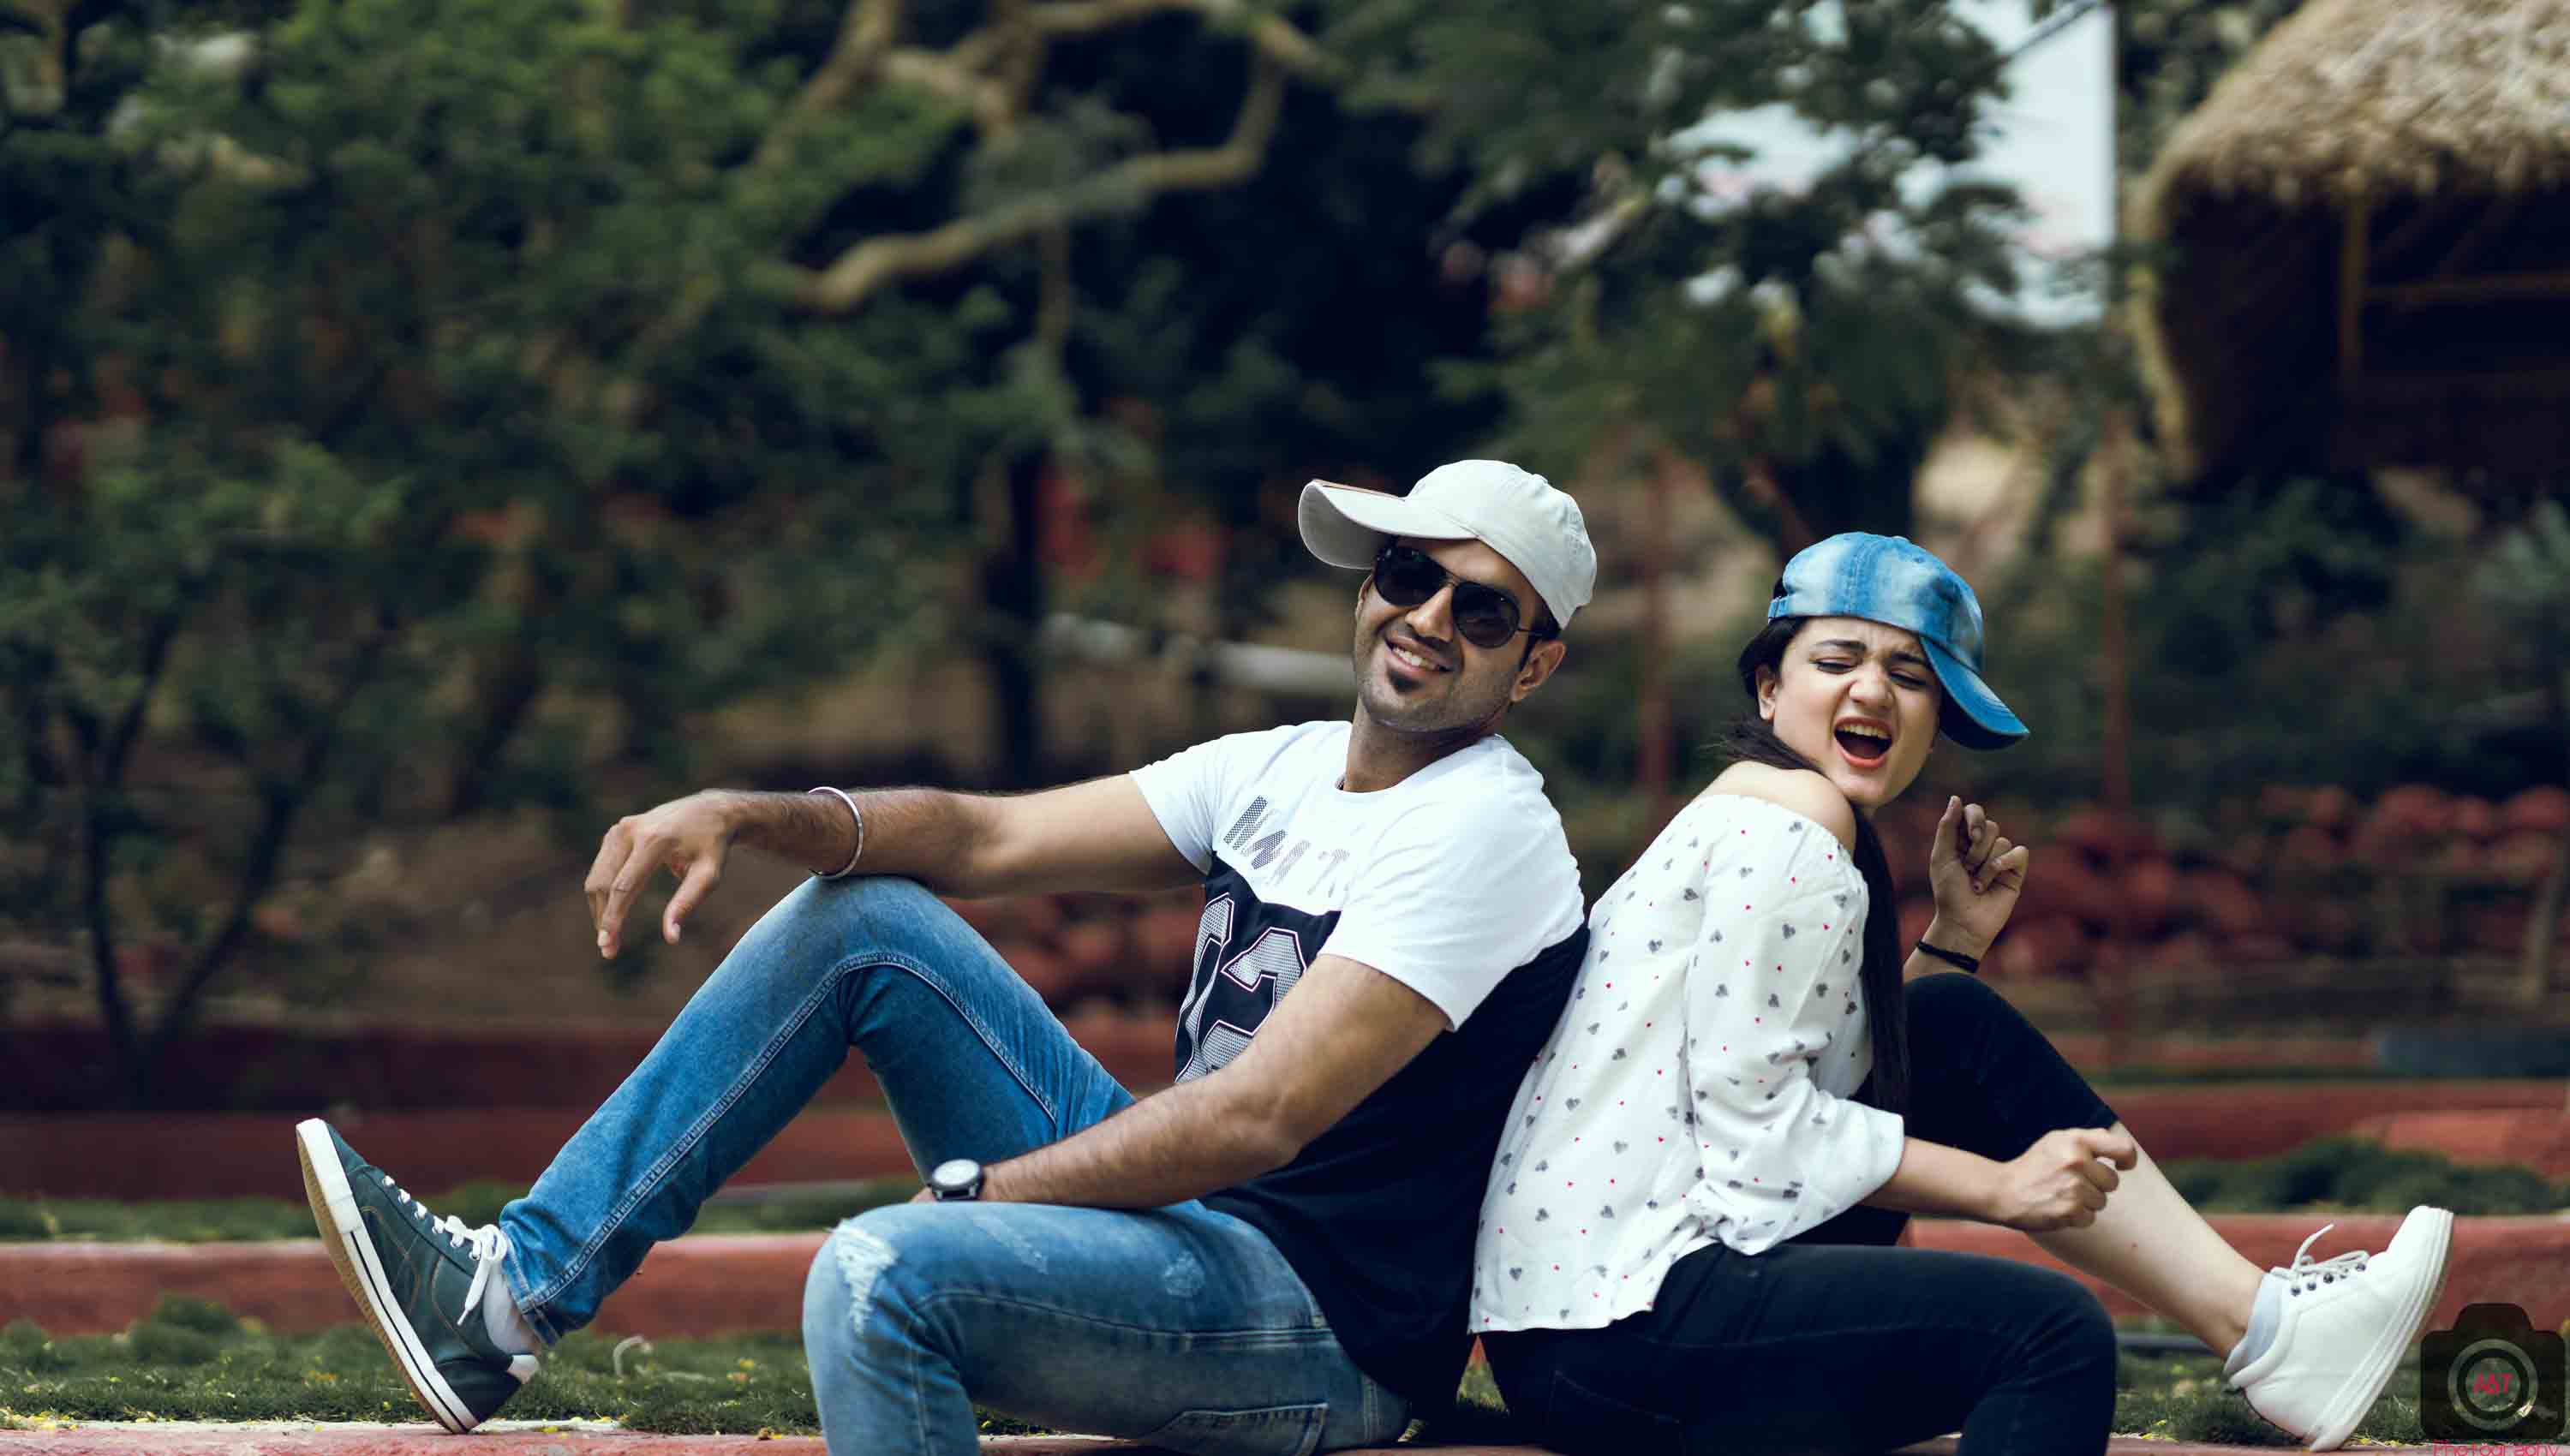 Naughty Pre-wedding Poses| Shilpa & Pulkit| A&T Photography-Premium Pre-wedding Photographer in Pune, India